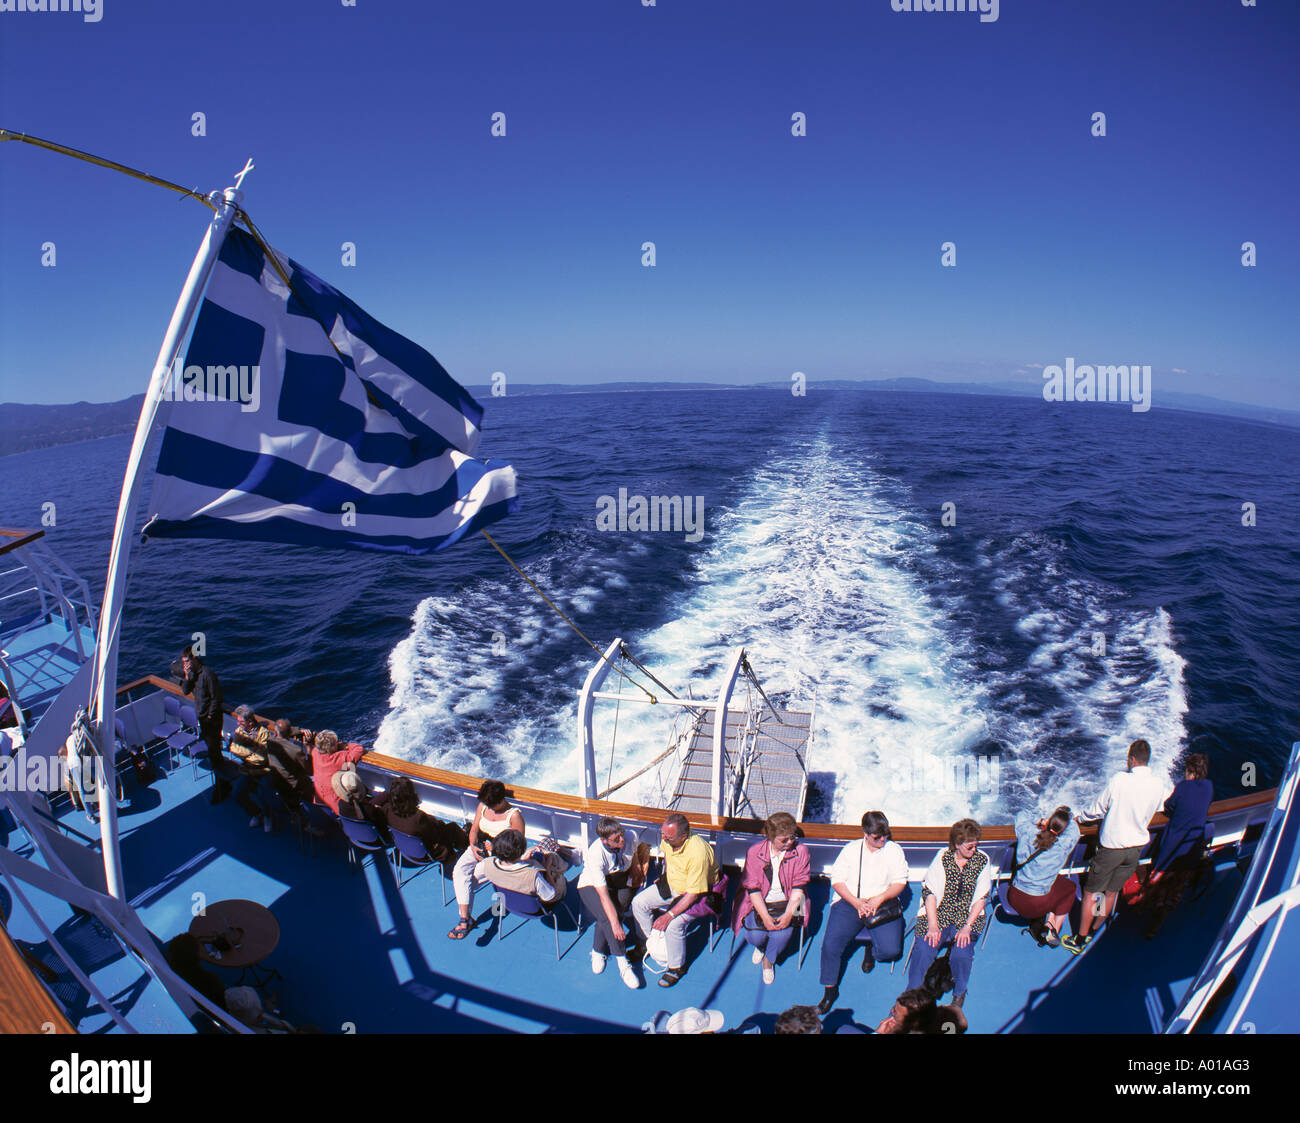 excursion ship, Greek flag, tourists, water tossed up by a ship, foaming sea, Aegean Sea Stock Photo